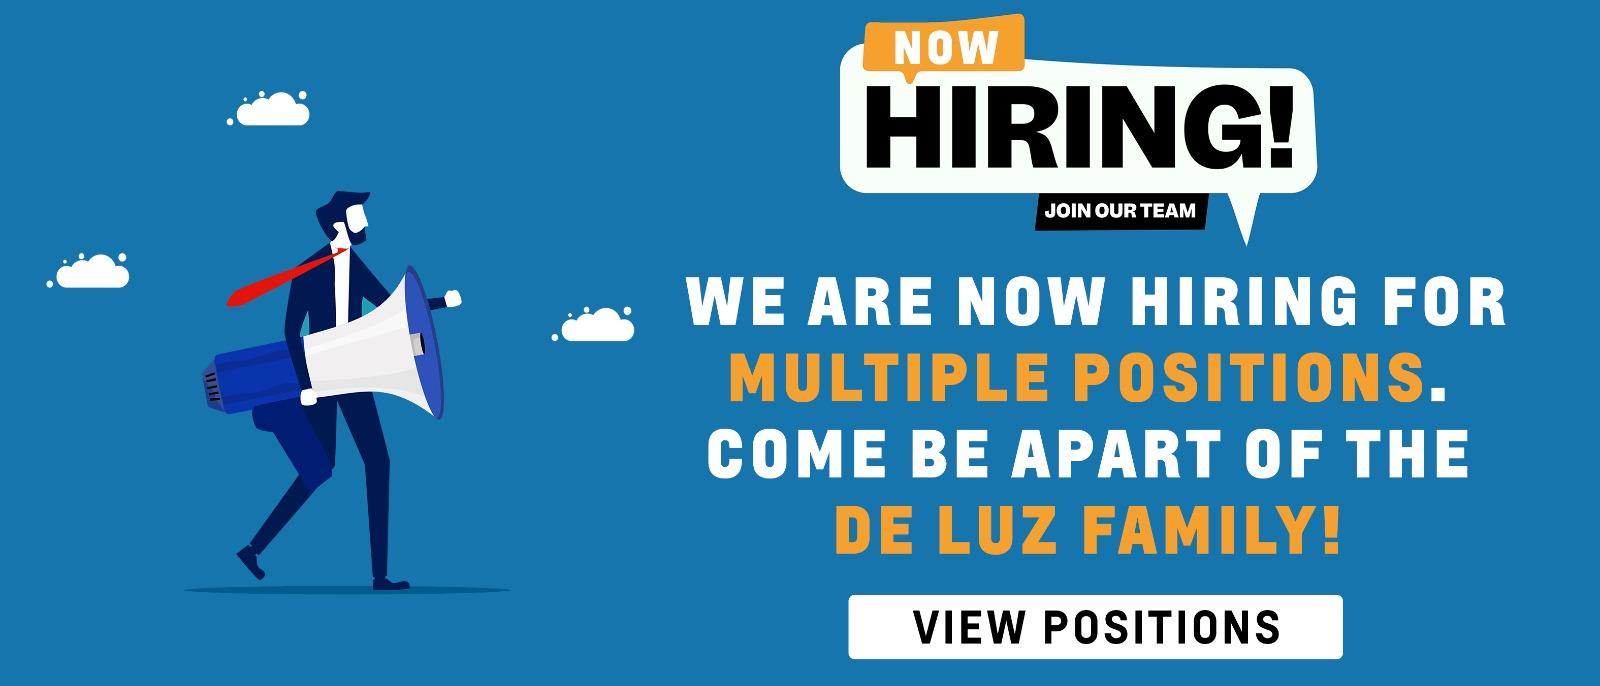 NOW HIRING!
We are now hiring for multiple positions. Come be apart of the De Luz family!